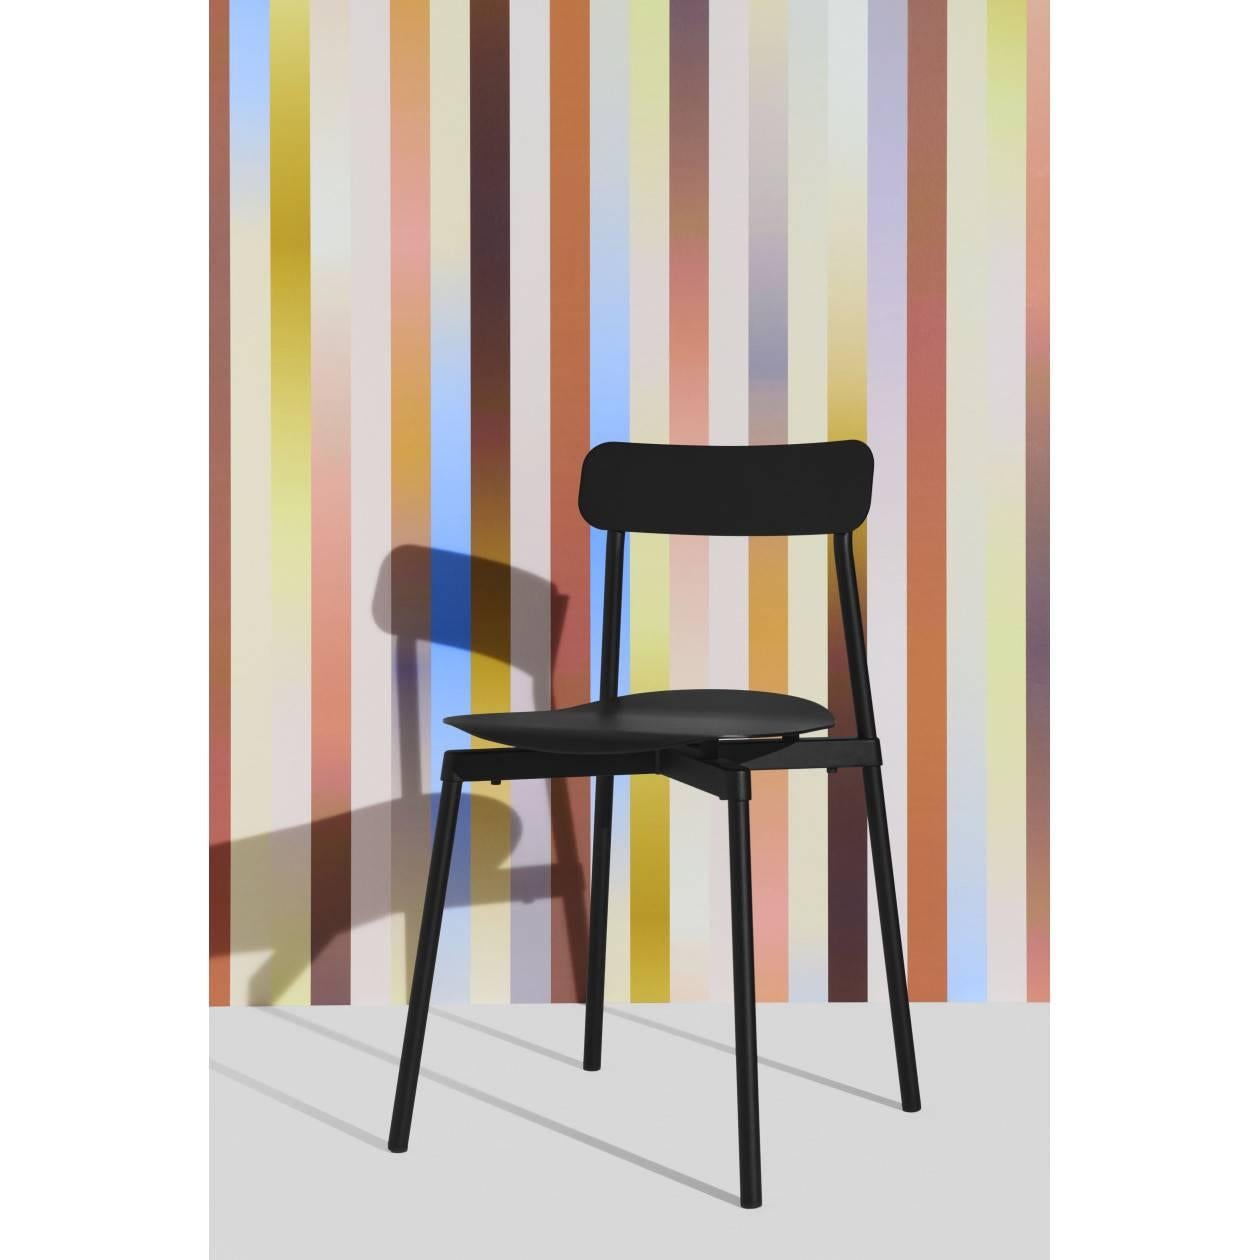 Infinitely more sophisticated than a simple two-tone creation, Carole Baijings has entirely reinvented the Iconic French stripes with a shifting colour palette. Through her range of wallpaper and panorama prints, each vertical stripe is a line of